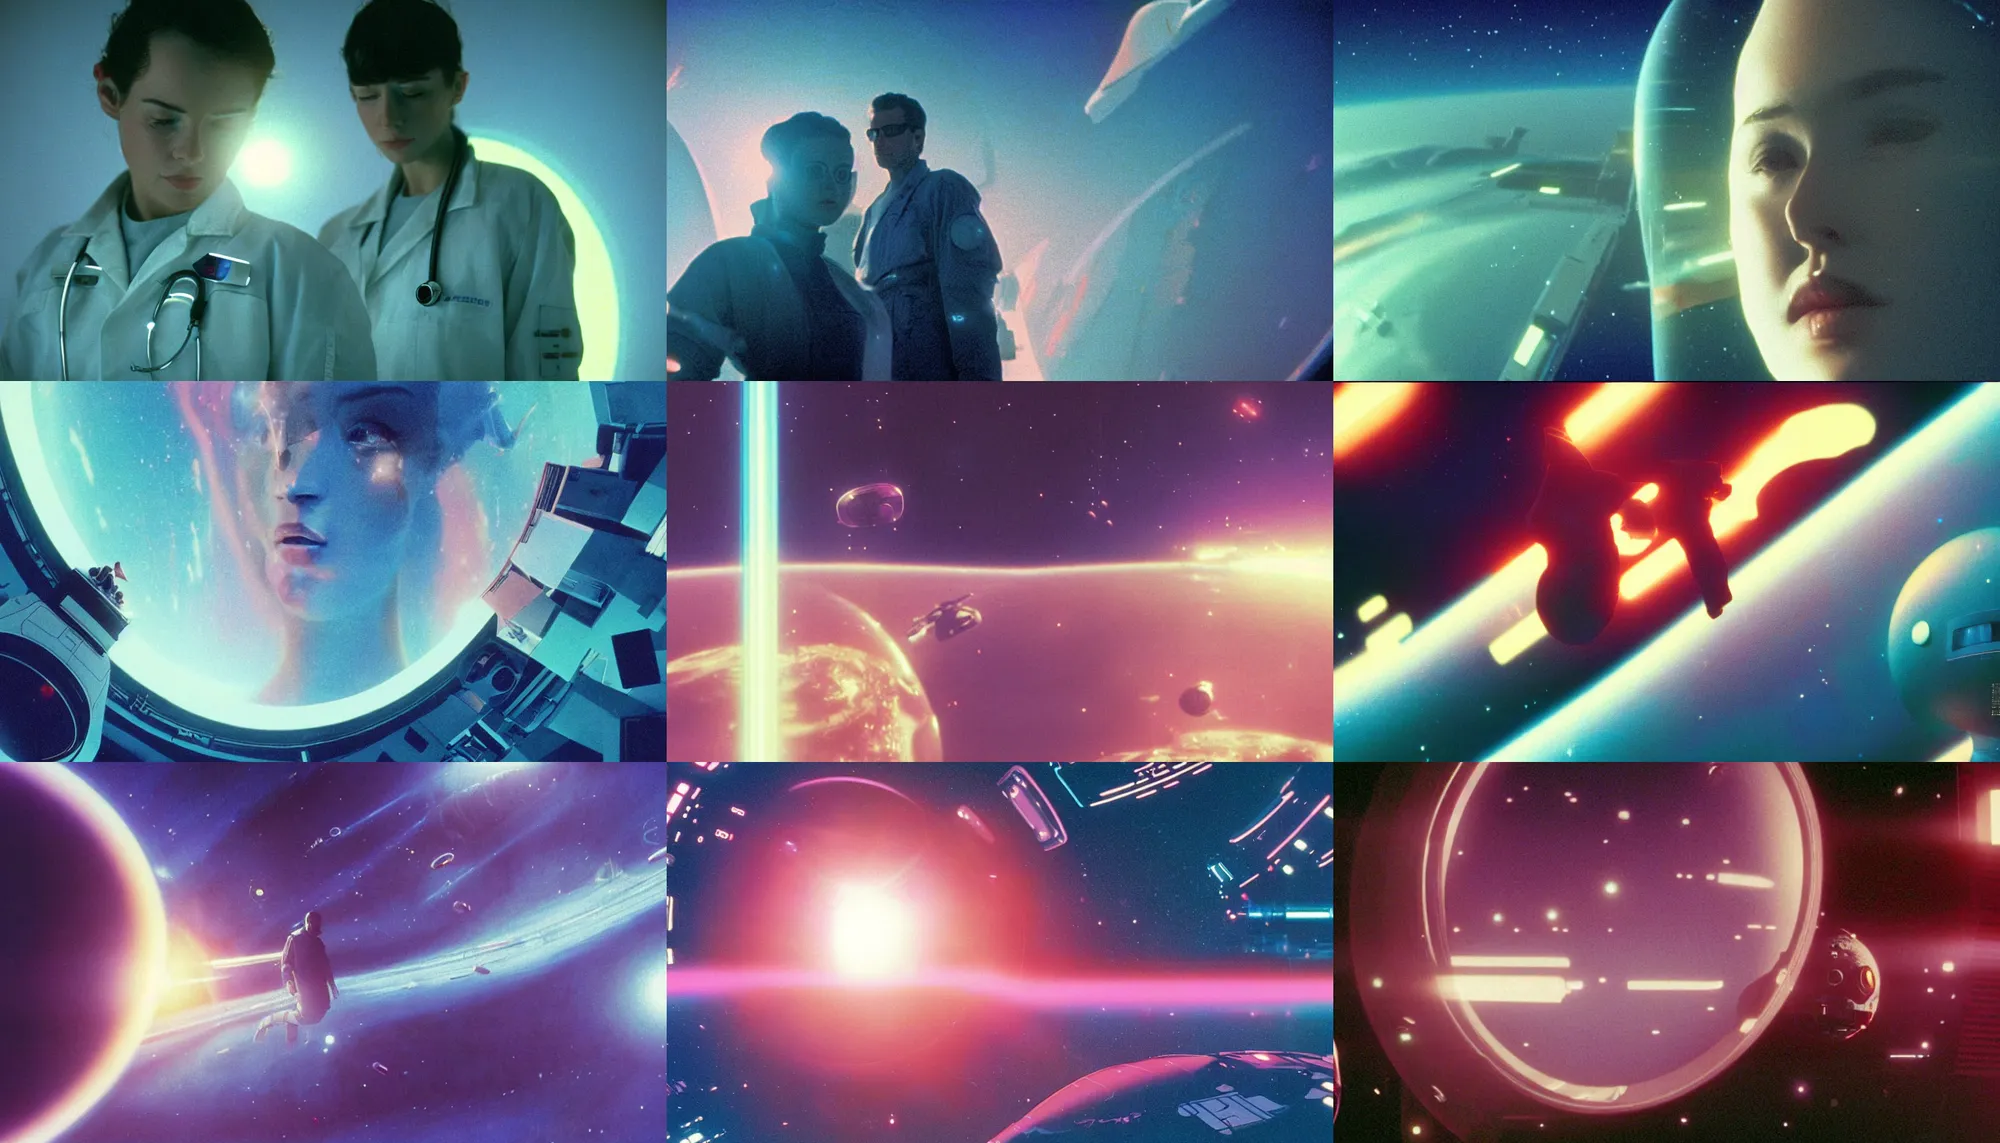 Prompt: Cinestill 50d, 8K, 35mm,J.J Abrams flare; beautiful ultra realistic vaporwave minimalistic moebius pilot in space(1950) film still medical bay scene in 2000s frontiers in blade runner retrofuturism fashion magazine September moebius seinen manga style hyperrealism holly herndon edition, highly detailed, extreme closeup three-quarter model portrait, tilt shift LaGrange point orbit background, three point perspective, focus on anti-g flight suit,<pointé pose>;open mouth,terrified, eye contact, soft lighting